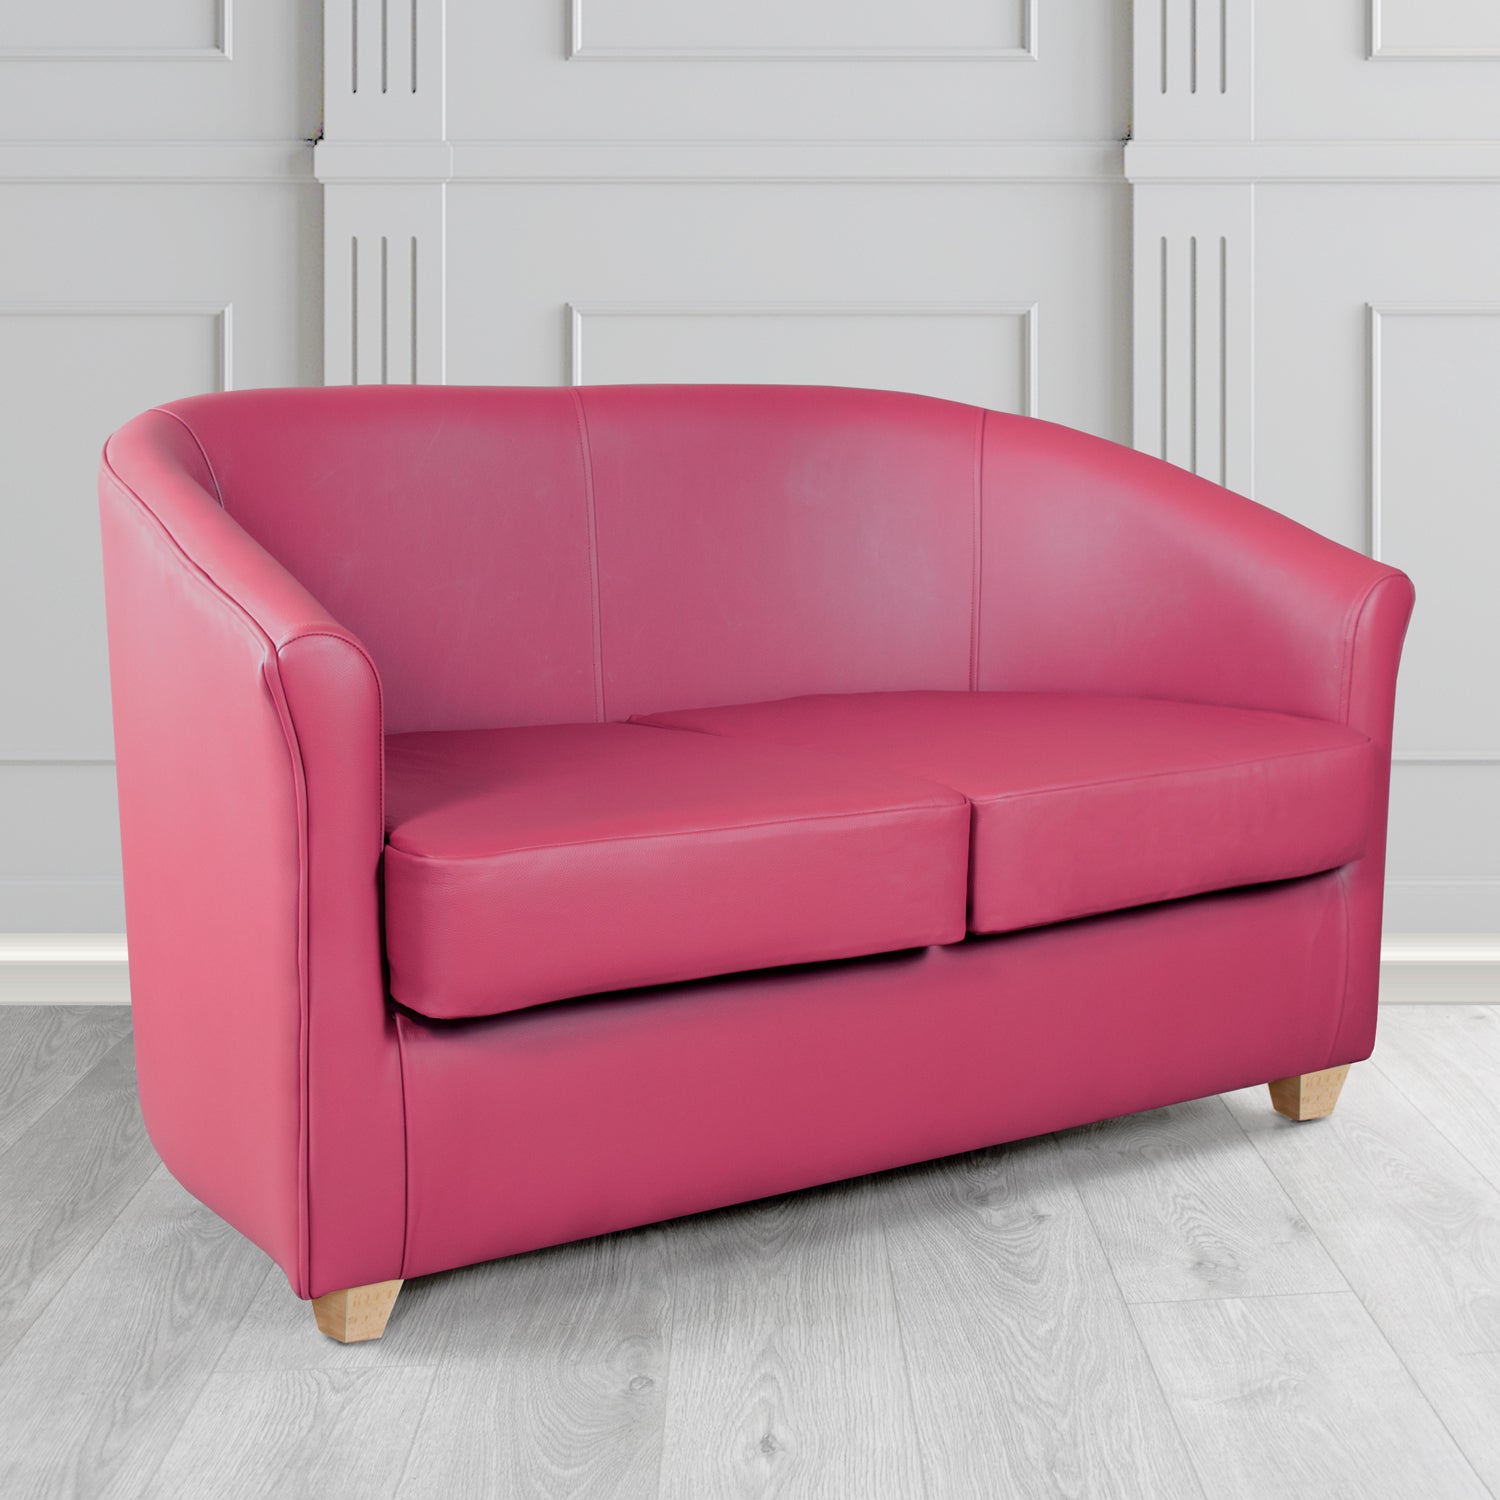 Cannes 2 Seater Tub Sofa in Just Colour Deep Rose Crib 5 Faux Leather - The Tub Chair Shop